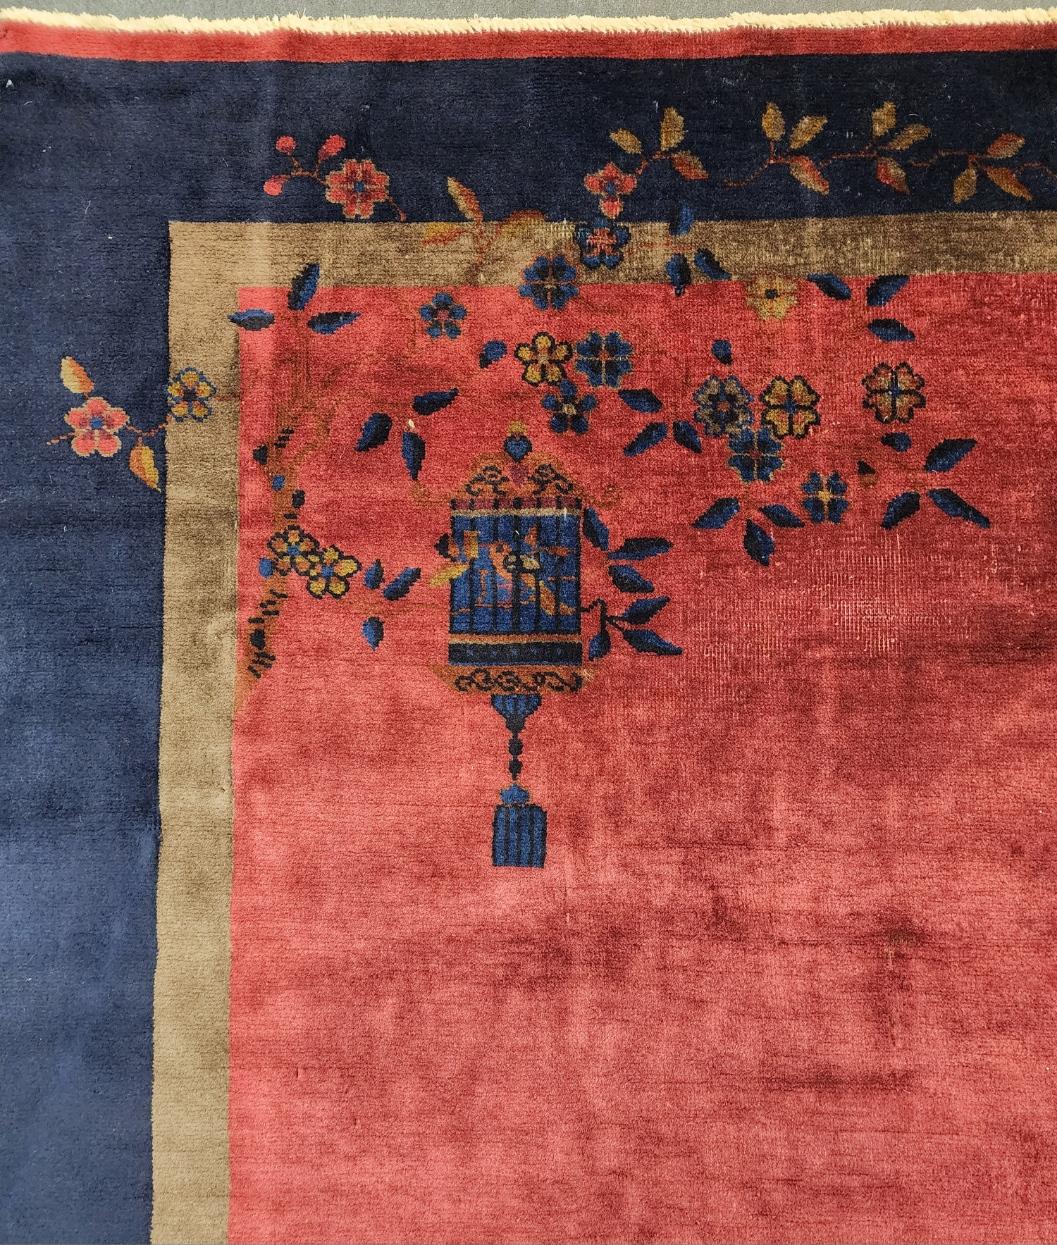 One of a kind !
Art deco Chinese Peking rug with a beautiful pink beige field surrounding a gorgeous floral medallion. Made in the early 1920s from high quality Chinese wool found along the ancient 